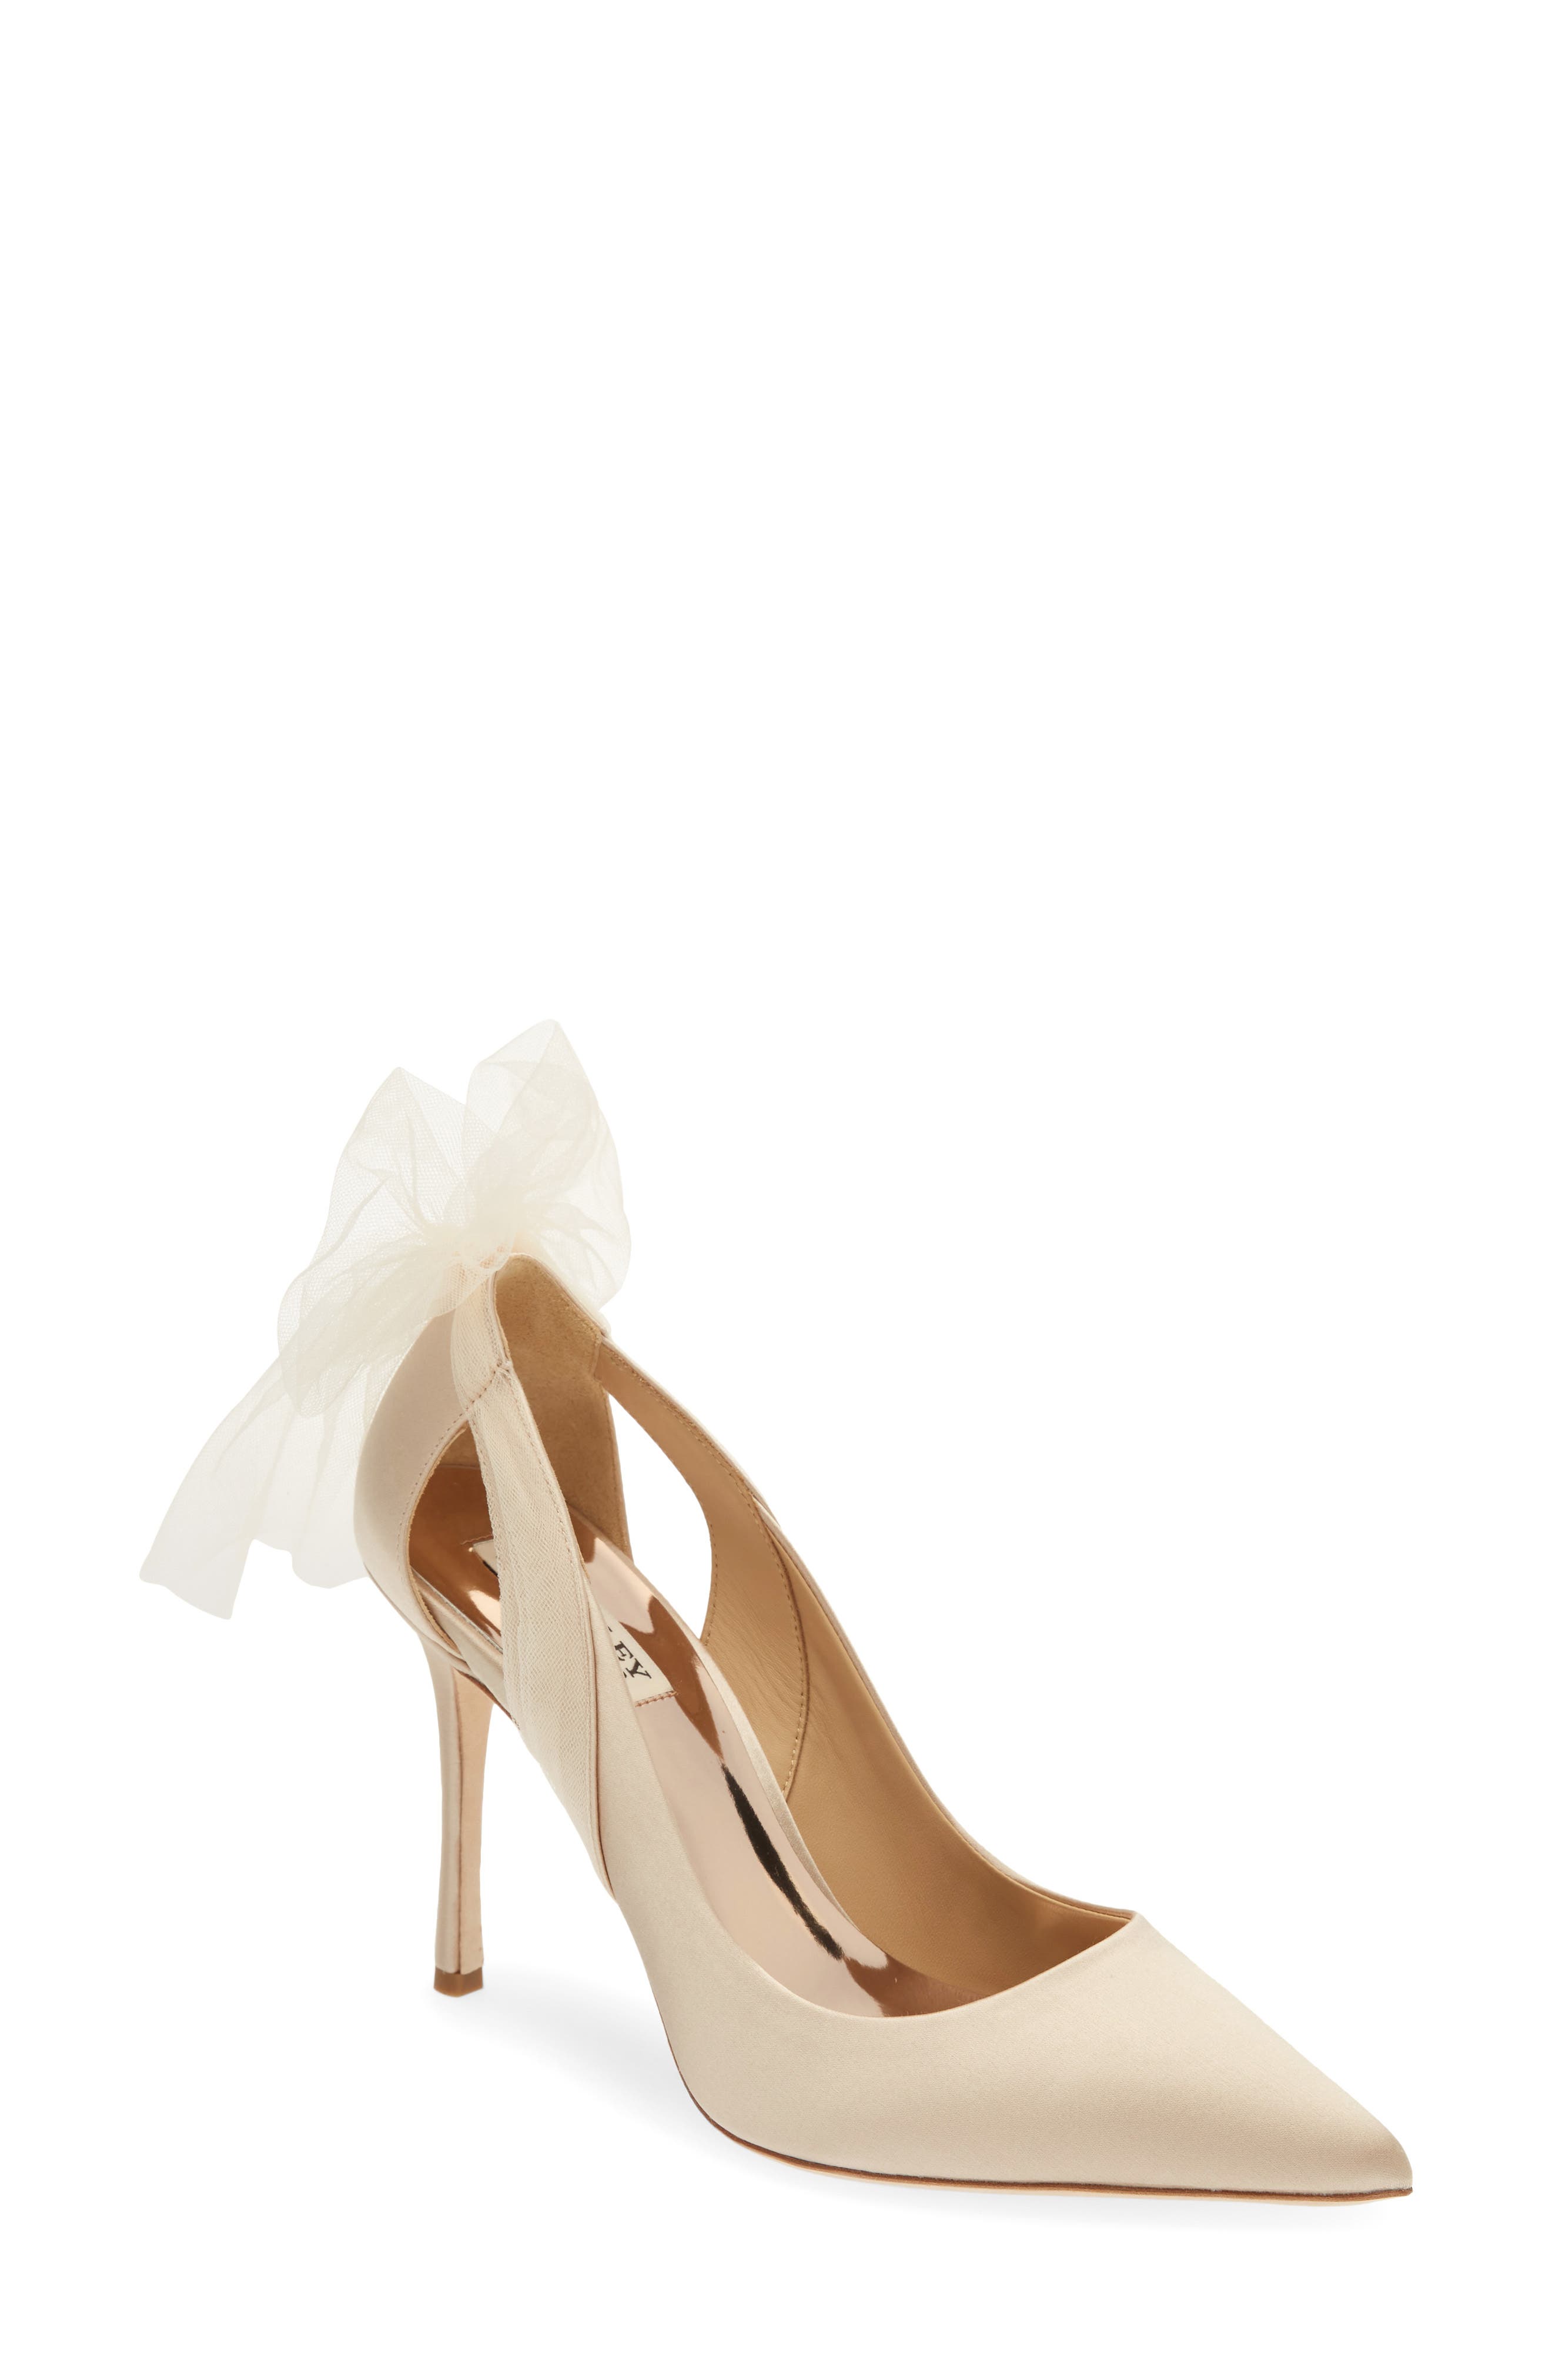 Badgley Mischka Collection Kinsley Pointed Toe Pump in Nude